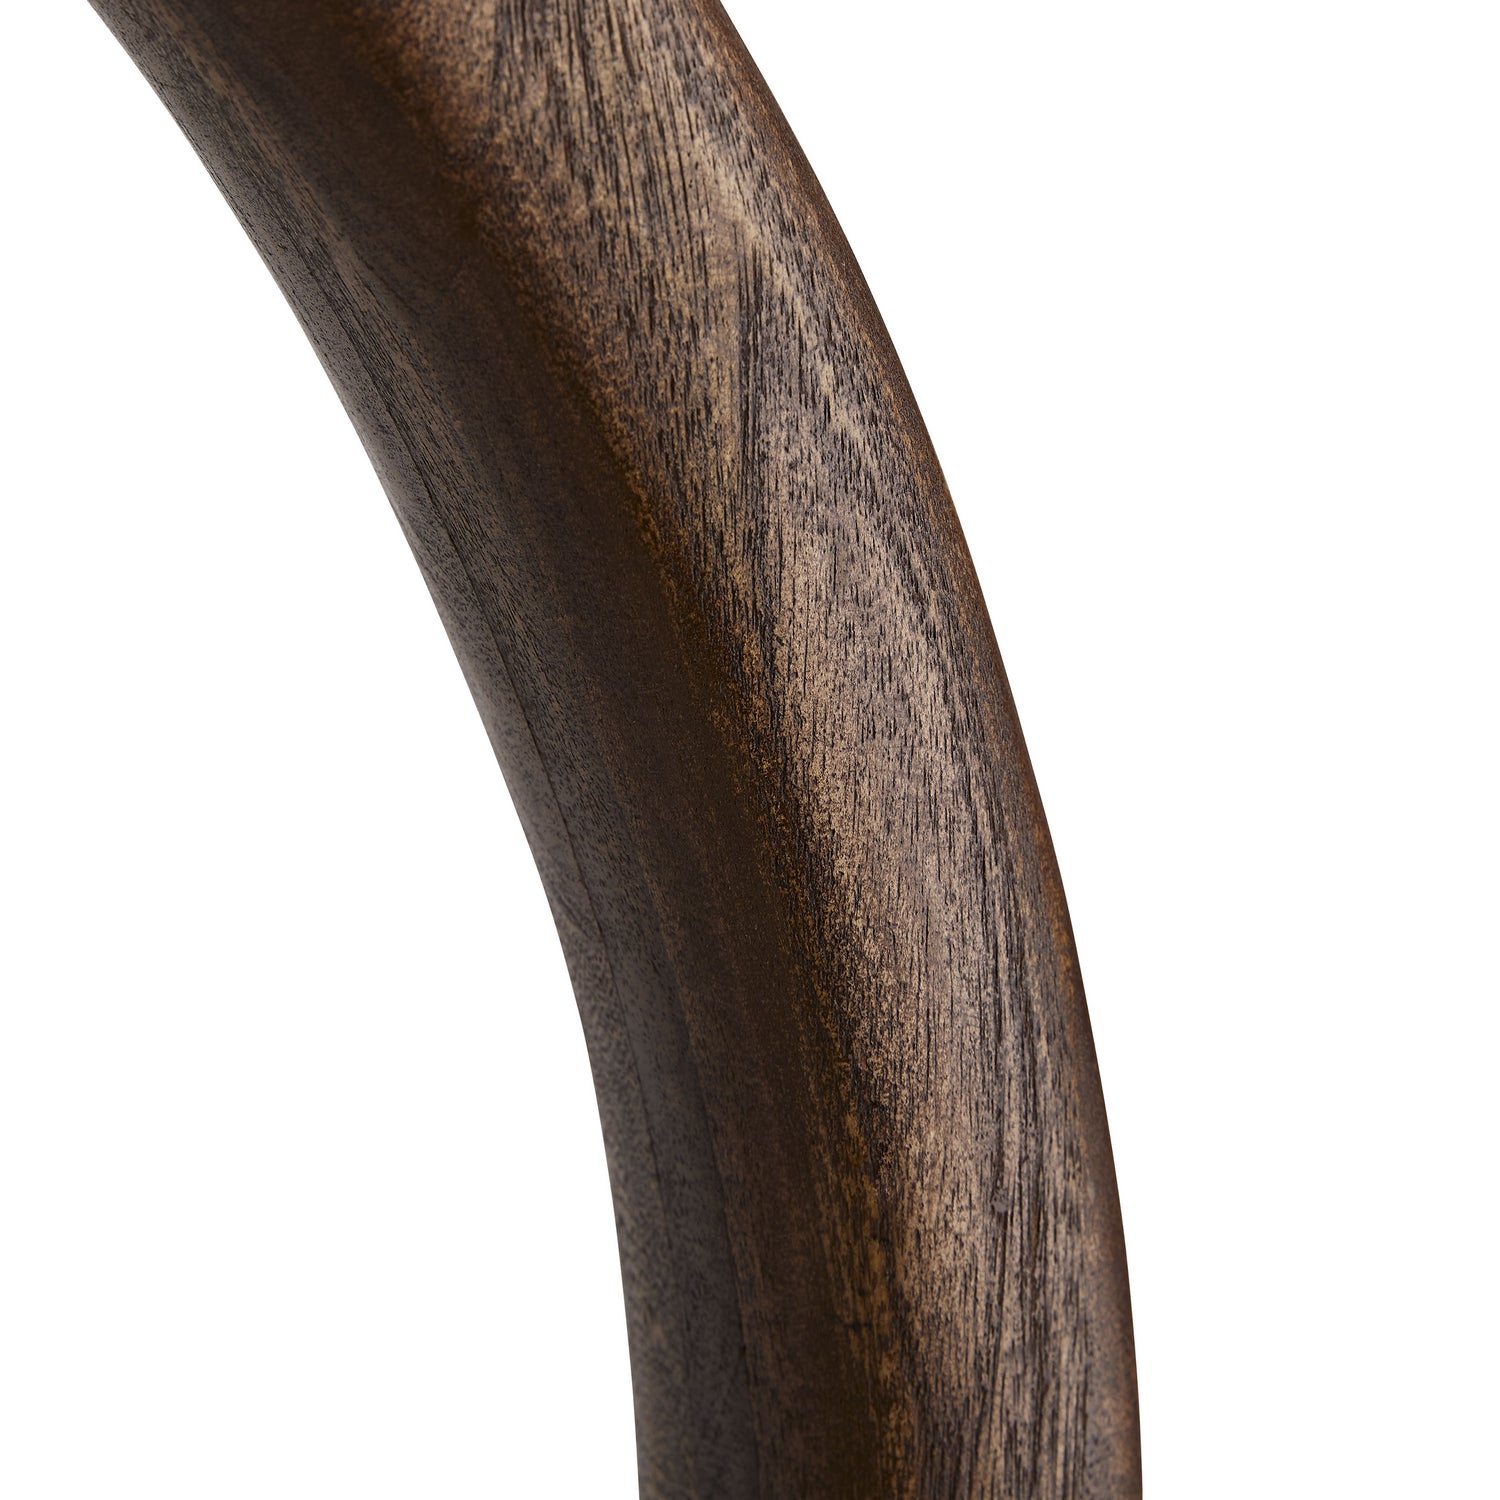 Sculpture from the Lesley collection in Light Walnut finish